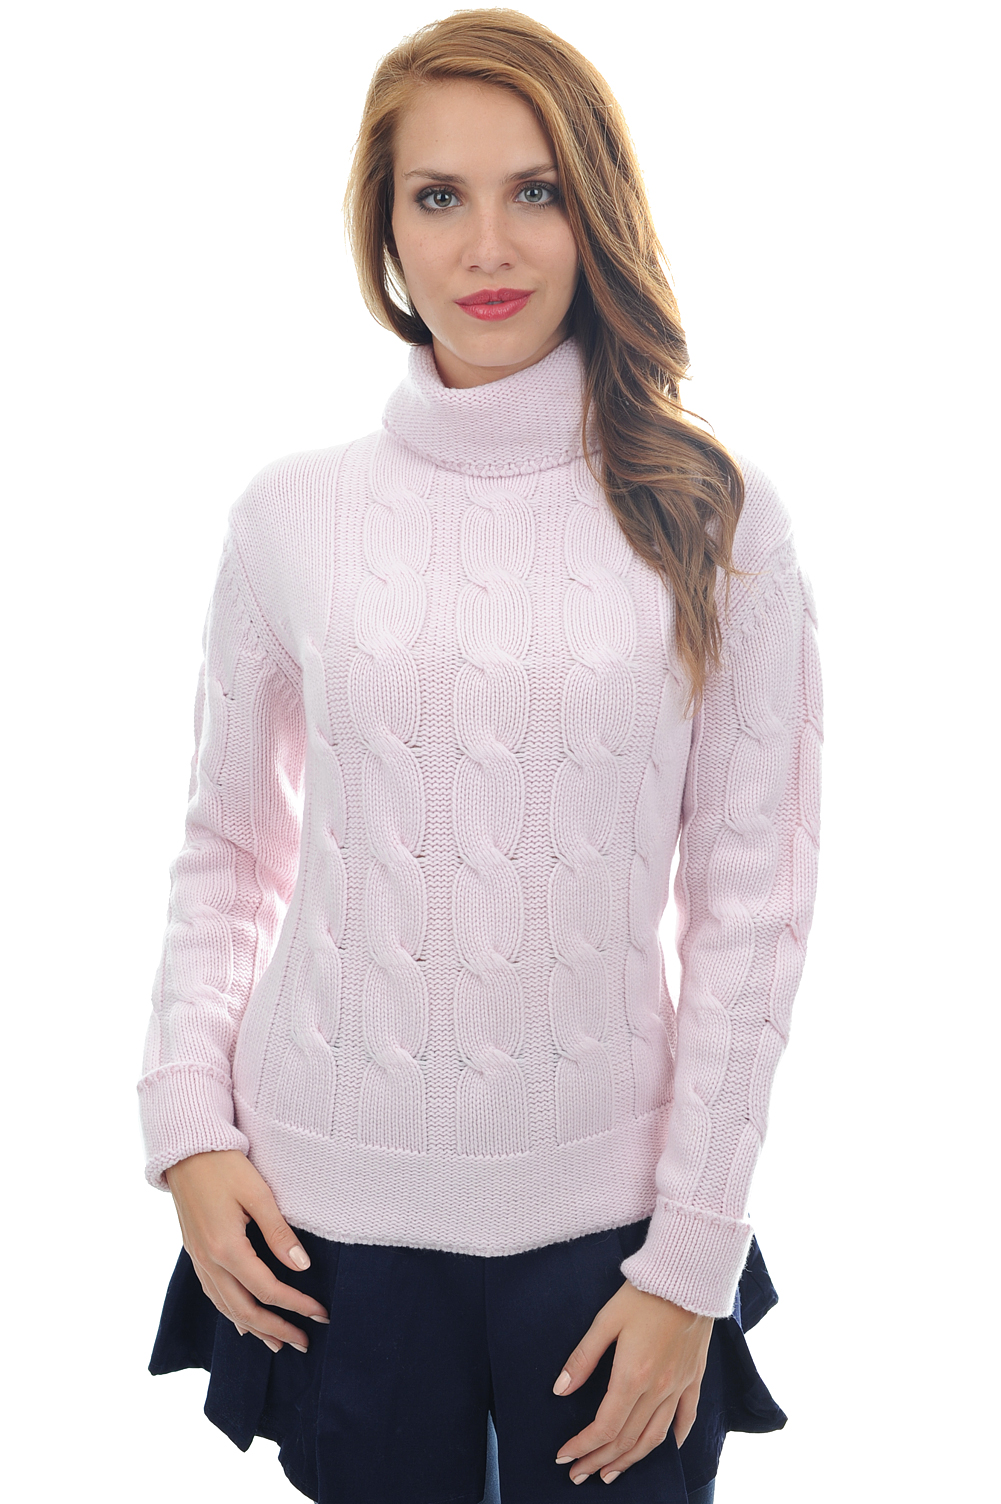 Cachemire pull femme blanche rose pale 2xl